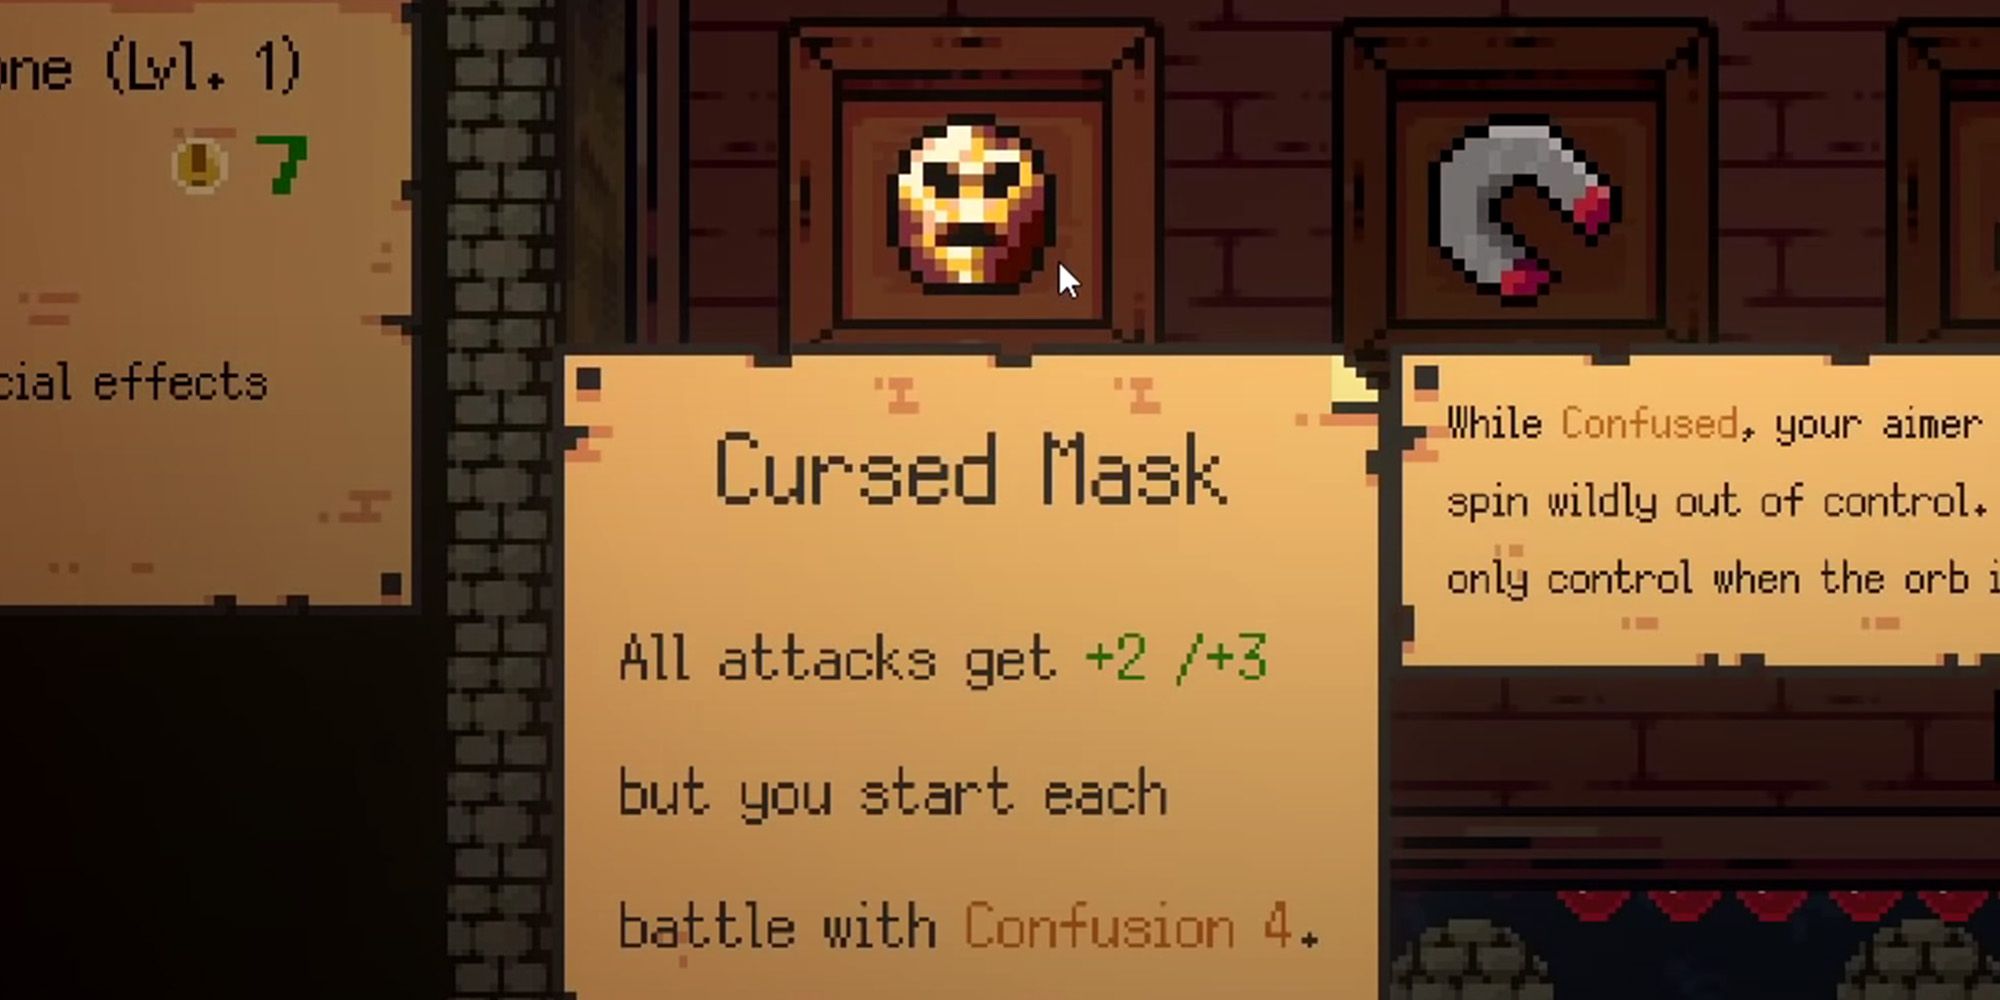 Peglin screenshot of the Cursed Mask Relic, which looks like a disembodied, angry gold face